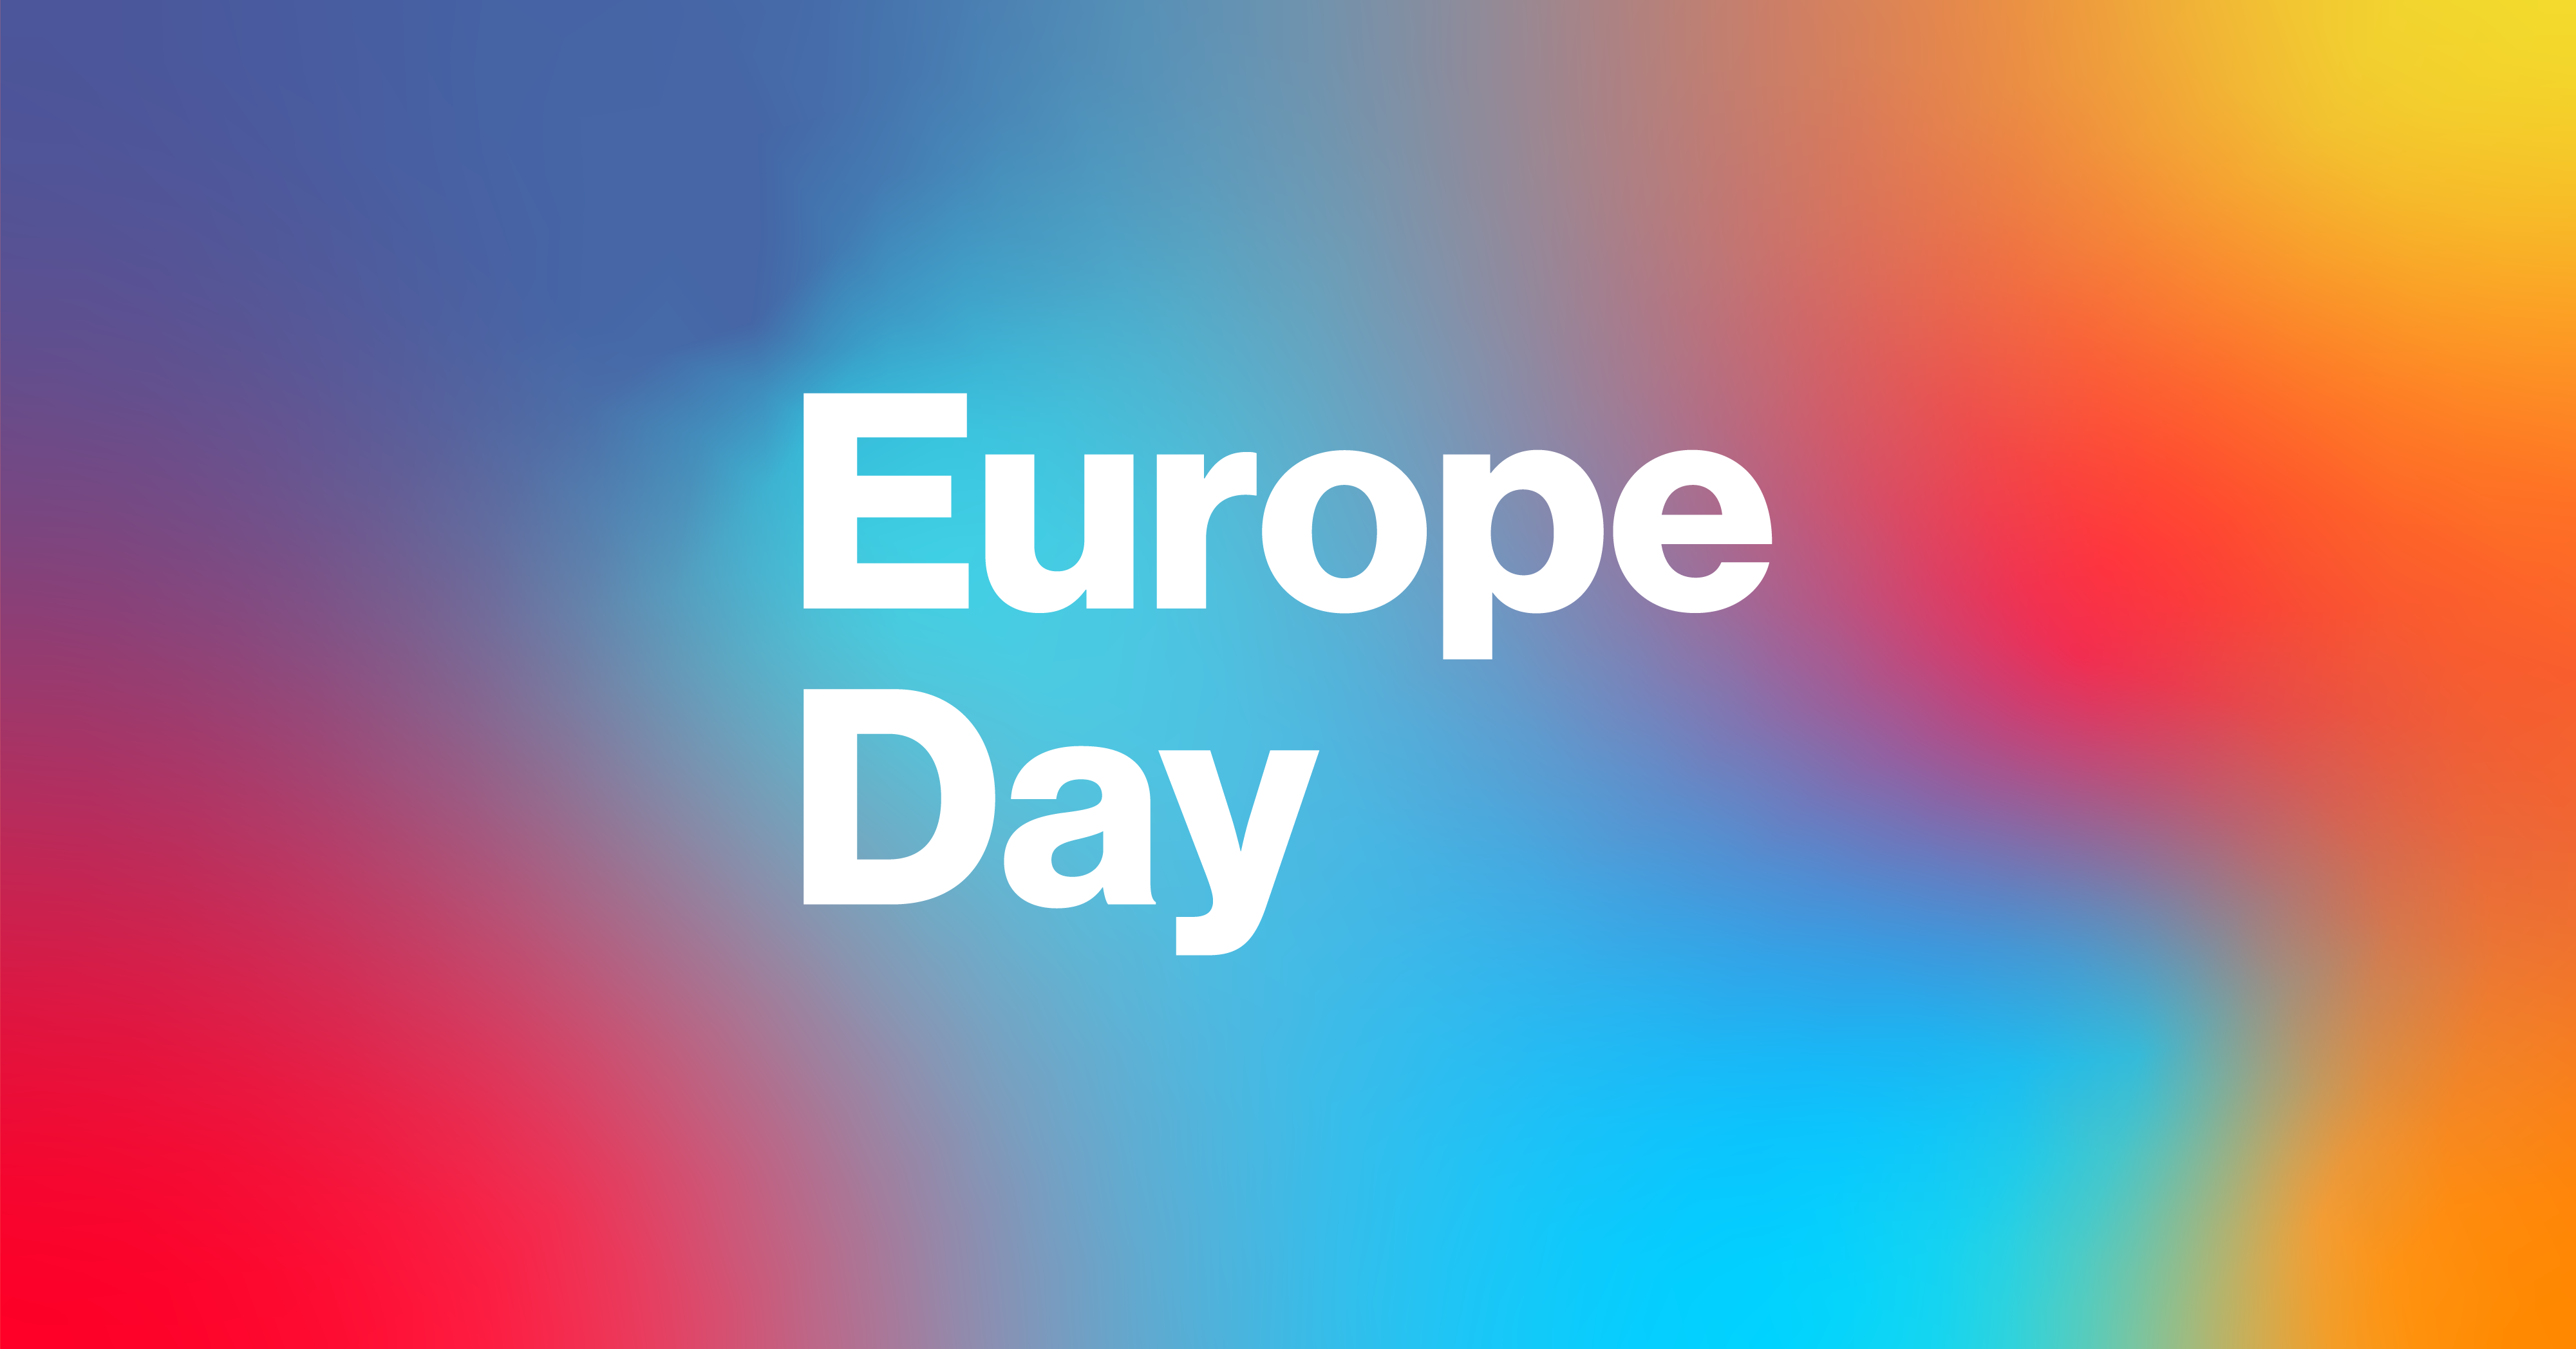 Join the Europe Day agenda and share your event!